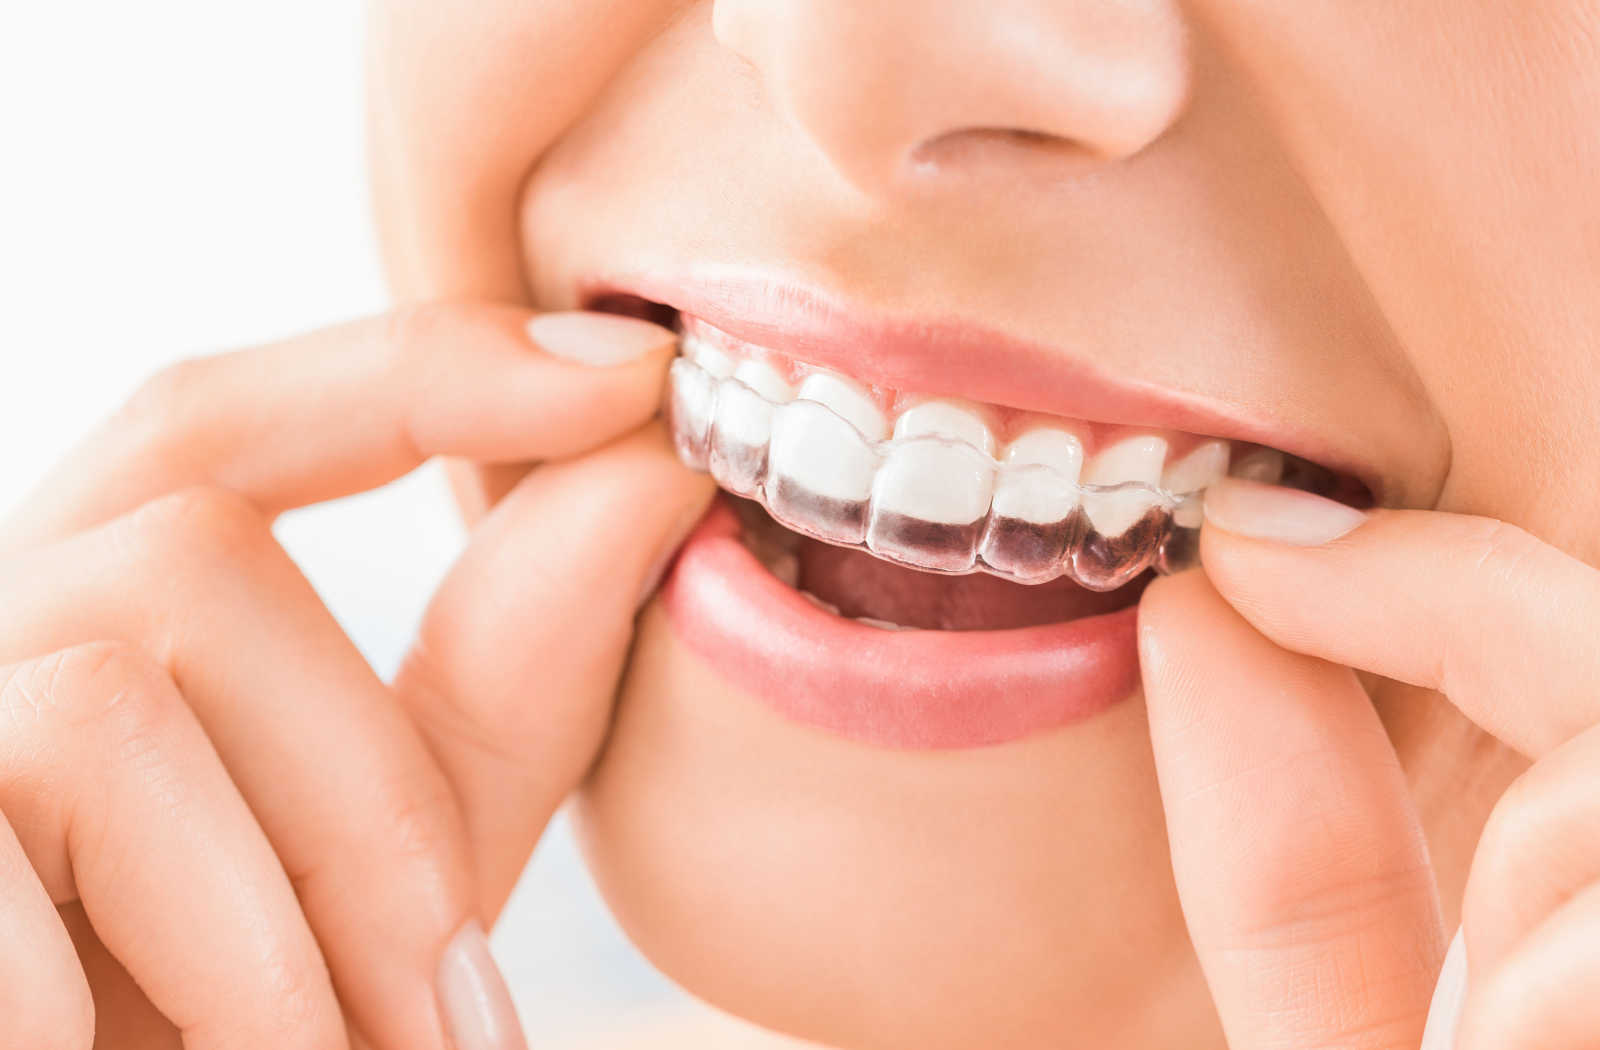 https://greengrovedentist.com/wp-content/uploads/2023/03/How-Much-Does-Invisalign-Cost-in-Edmonton_-Hero.jpg